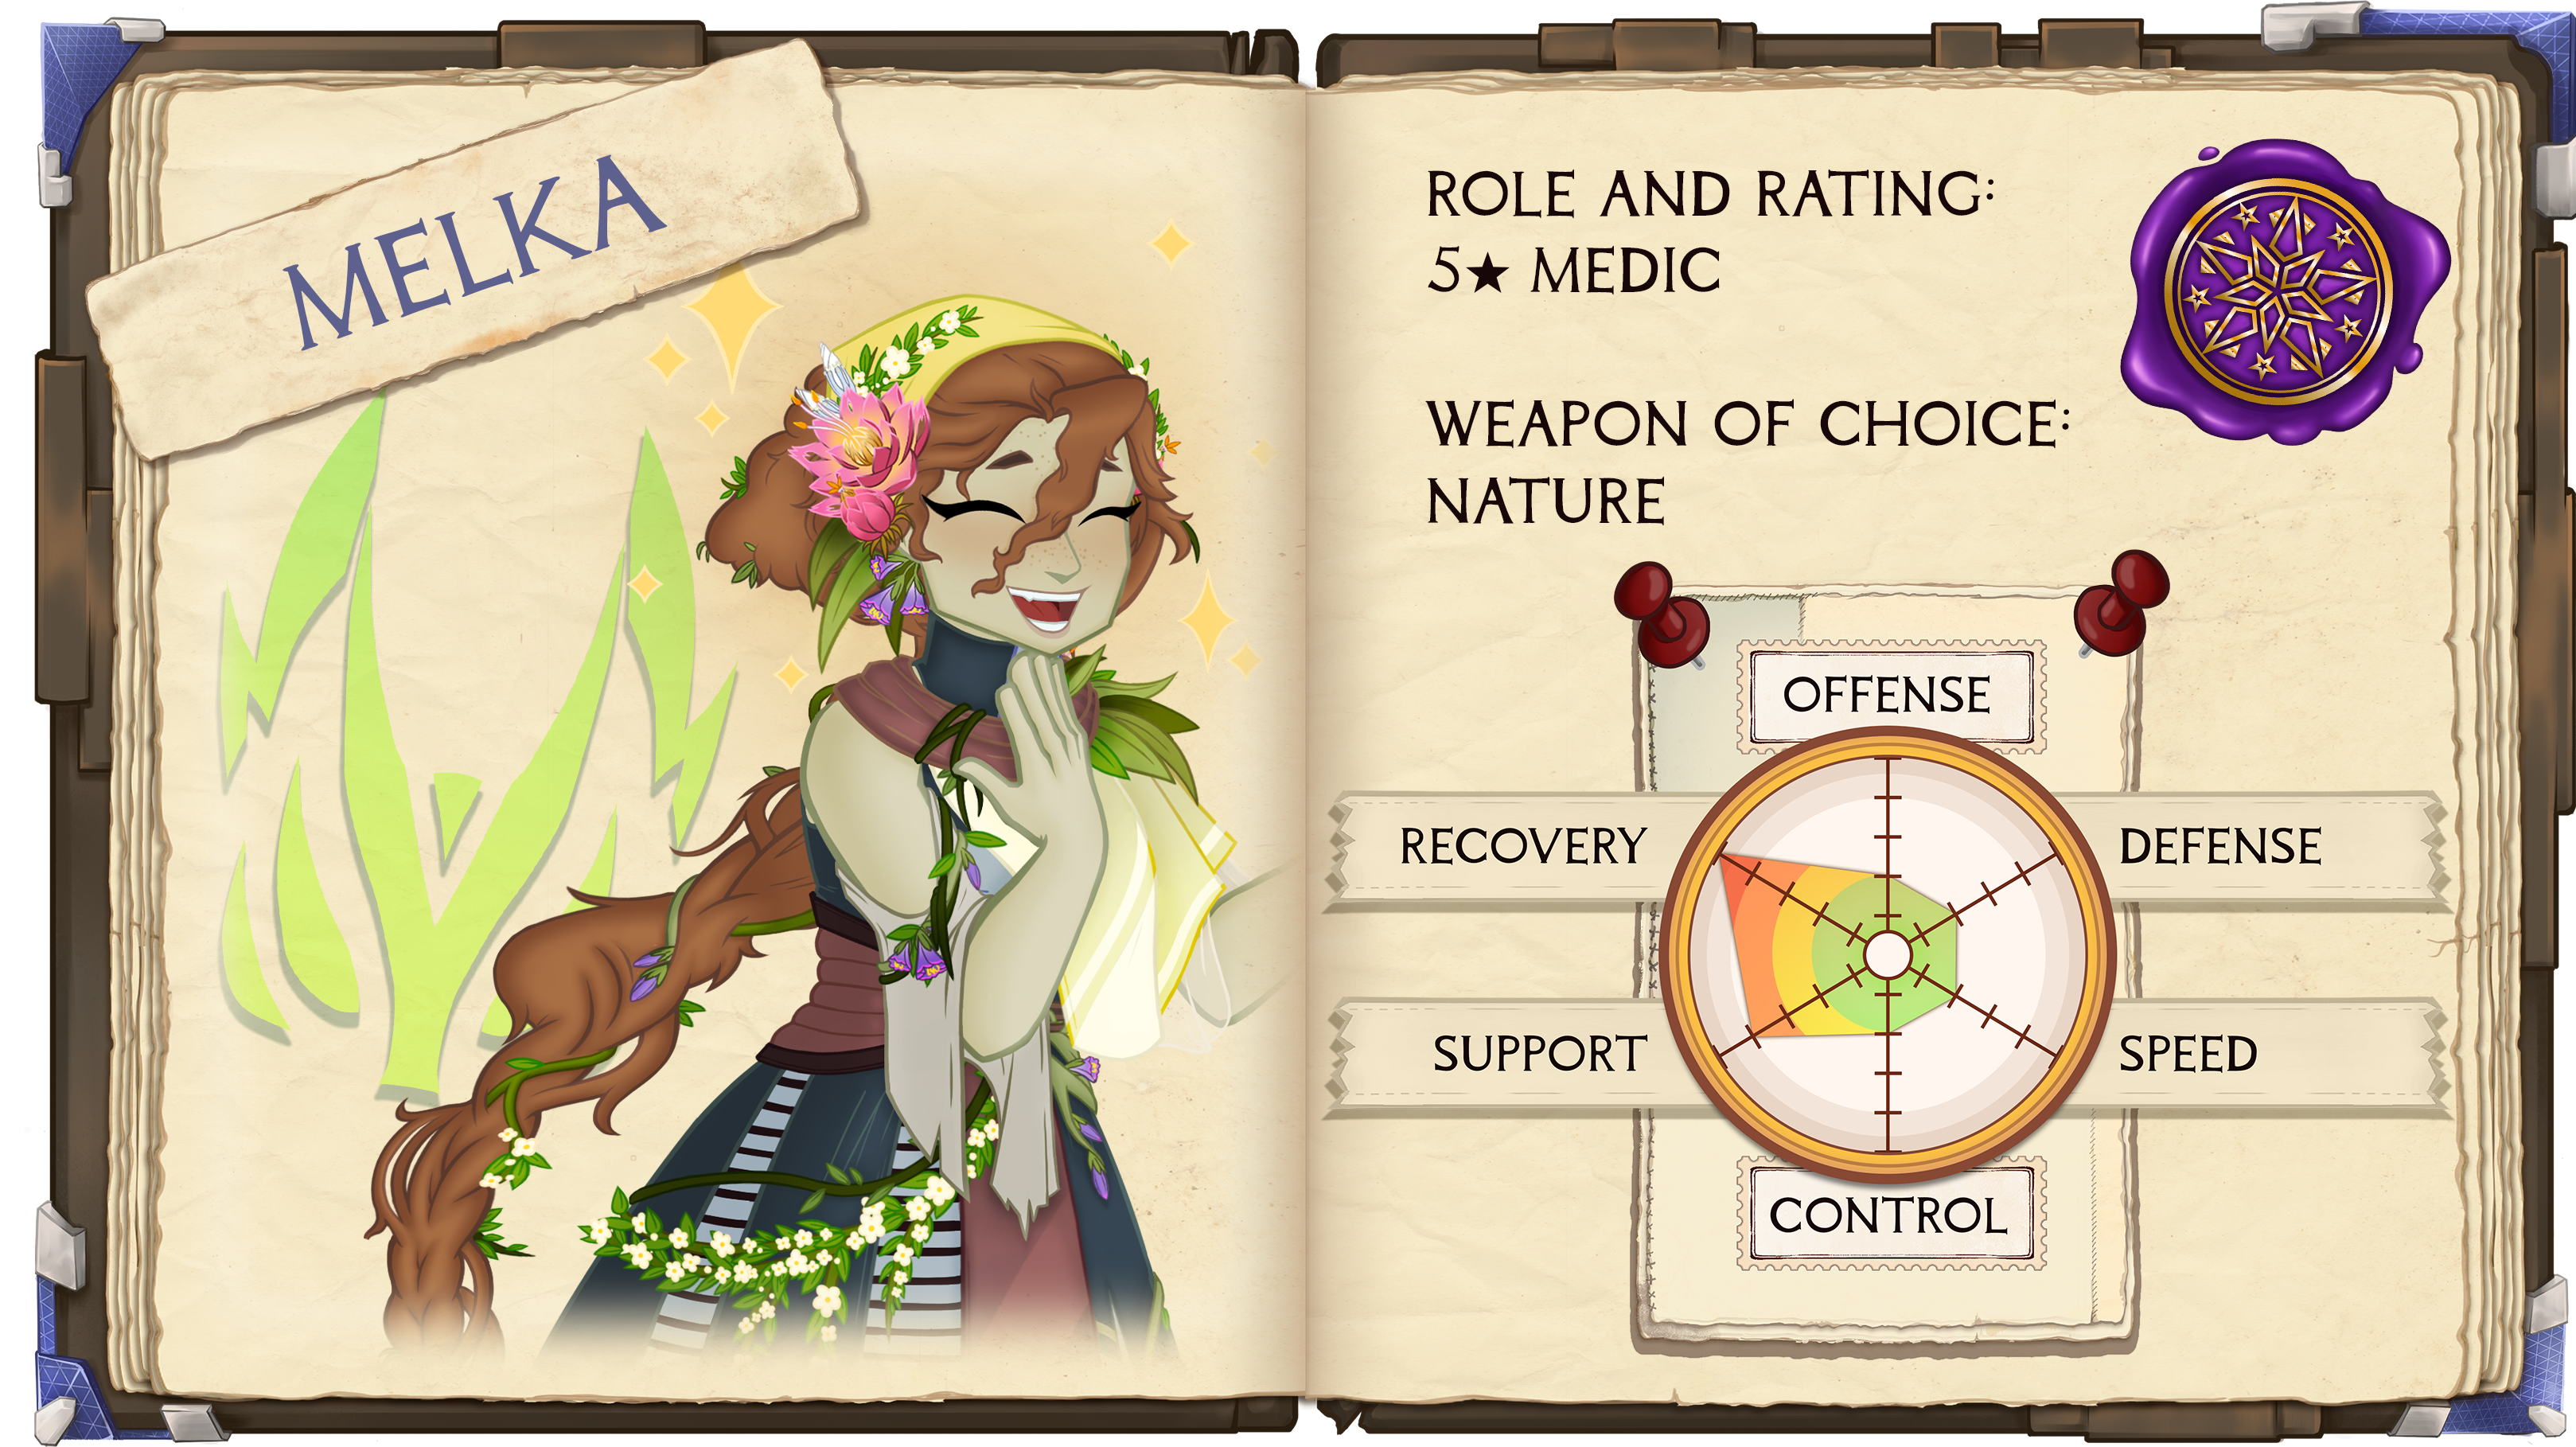 Melka. Role and Rating: 5 Star Medic. Weapon of Choice: Nature: Offense: 2/5. Defense: 2/5. Speed: 2/5. Control: 2/5. Support: 4/5. Recovery: 5/5.